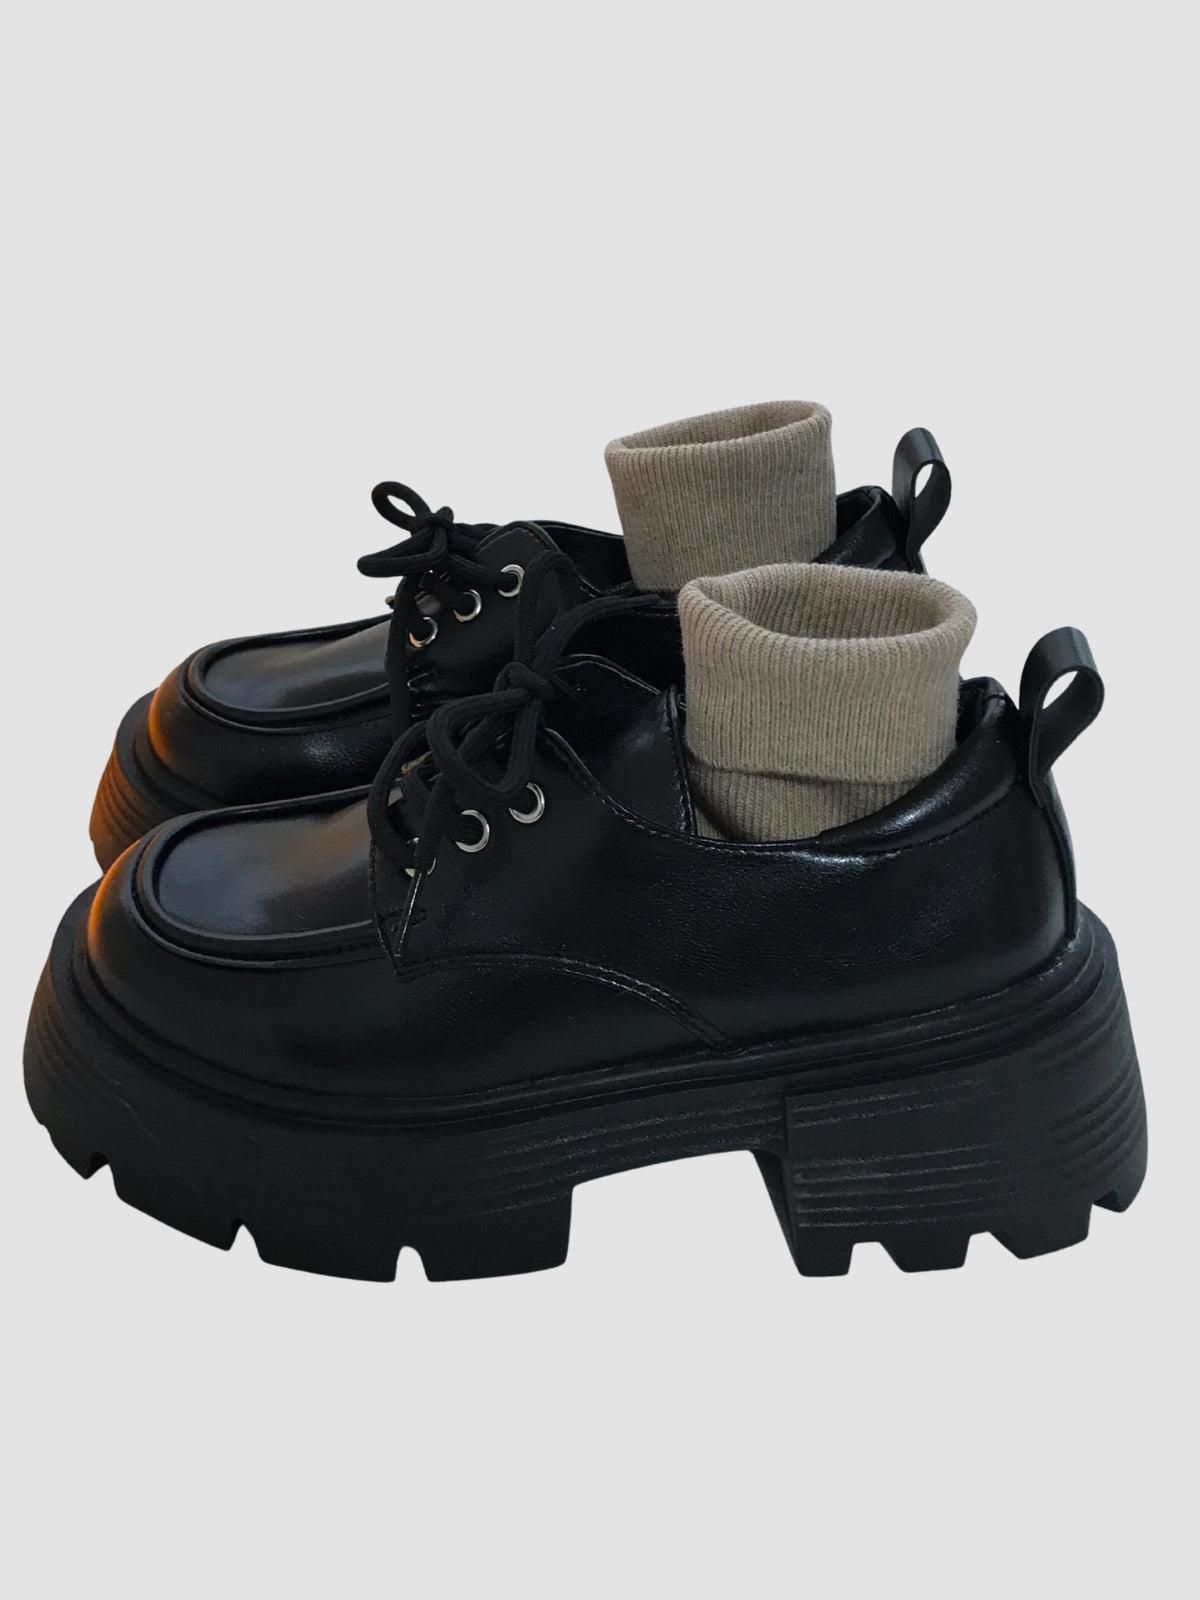 WLS Thick Soled Leather Women Retro Shoes